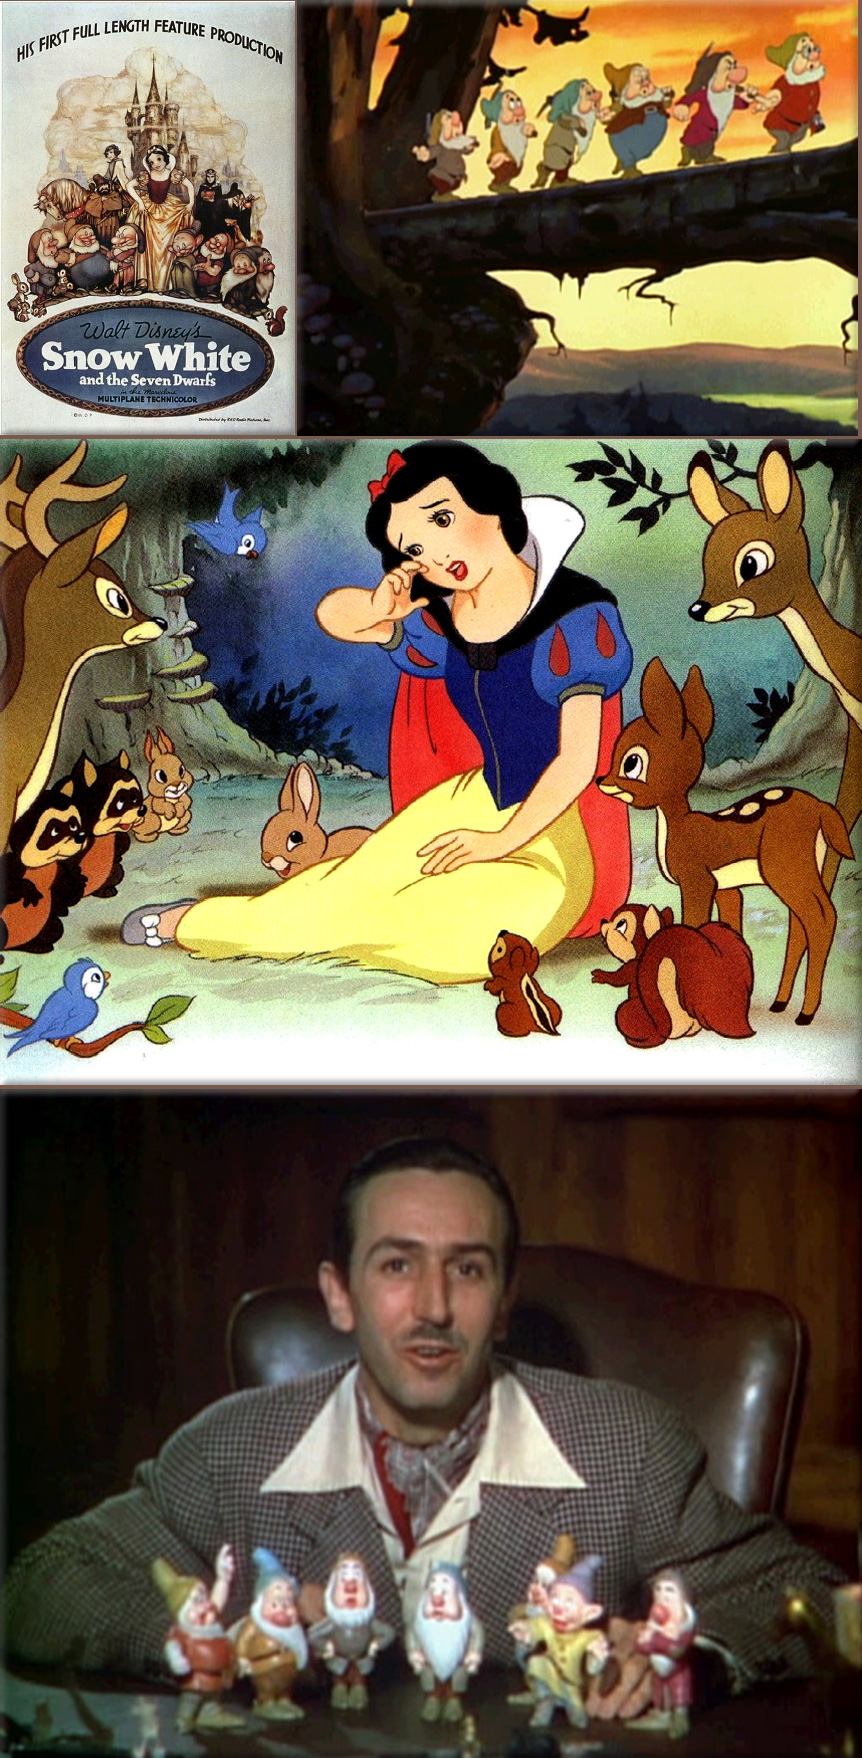 Snow White and the Seven Dwarfs: Original theatrical one-sheet poster; The famous 'Heigh-Ho' sequence from Snow White and the Seven Dwarfs, animated by Shamus Culhane; Walt Disney introduces each of the Seven Dwarfs in a scene from the original 1937 Snow White and the Seven Dwarfs theatrical trailer